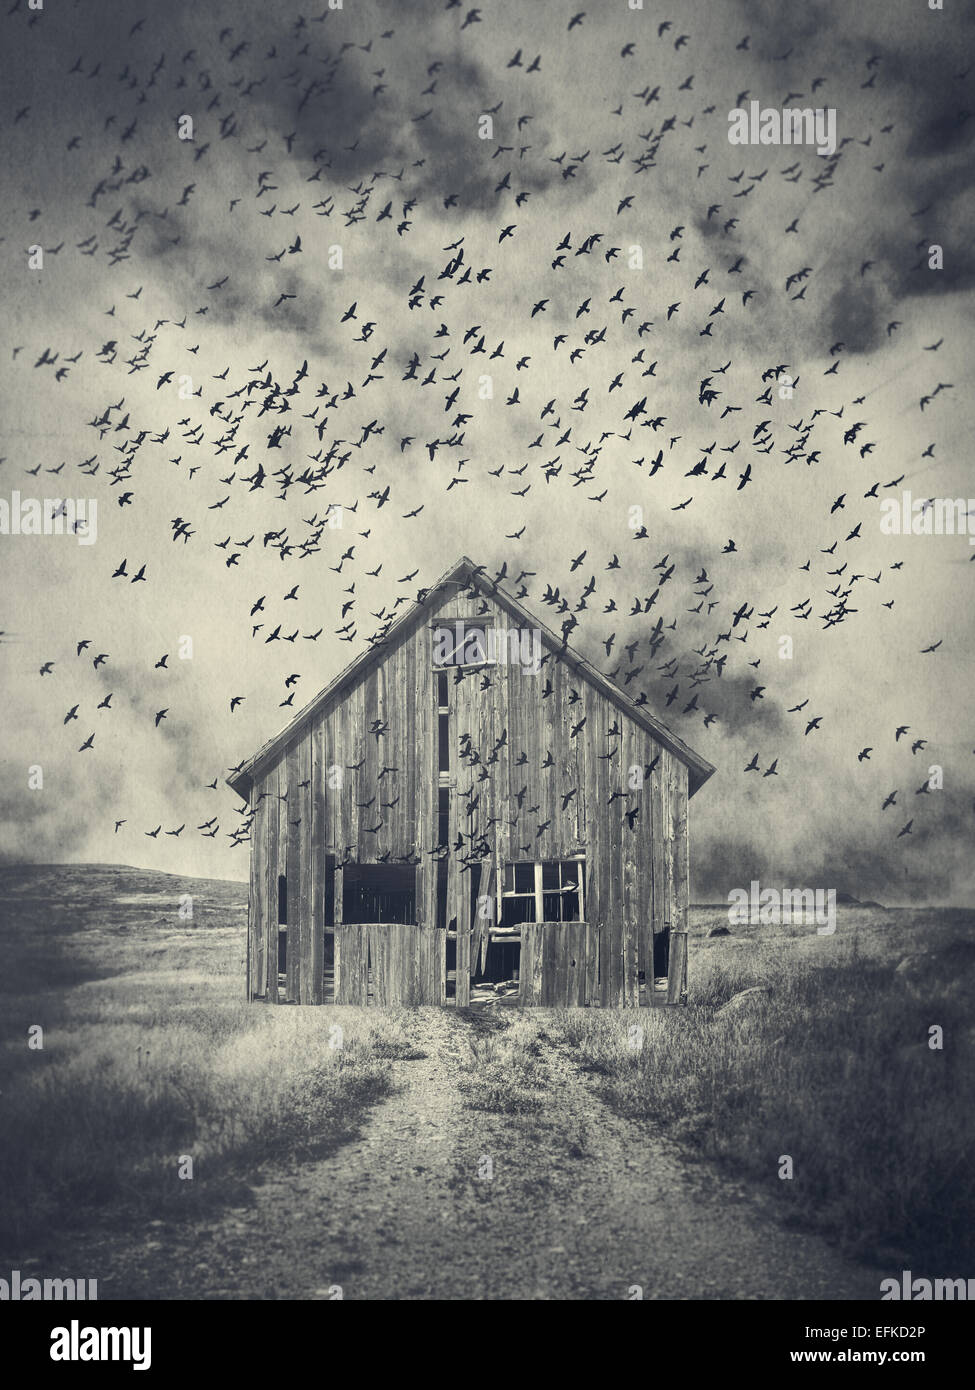 An old abandoned barn surrounded by birds. Stock Photo